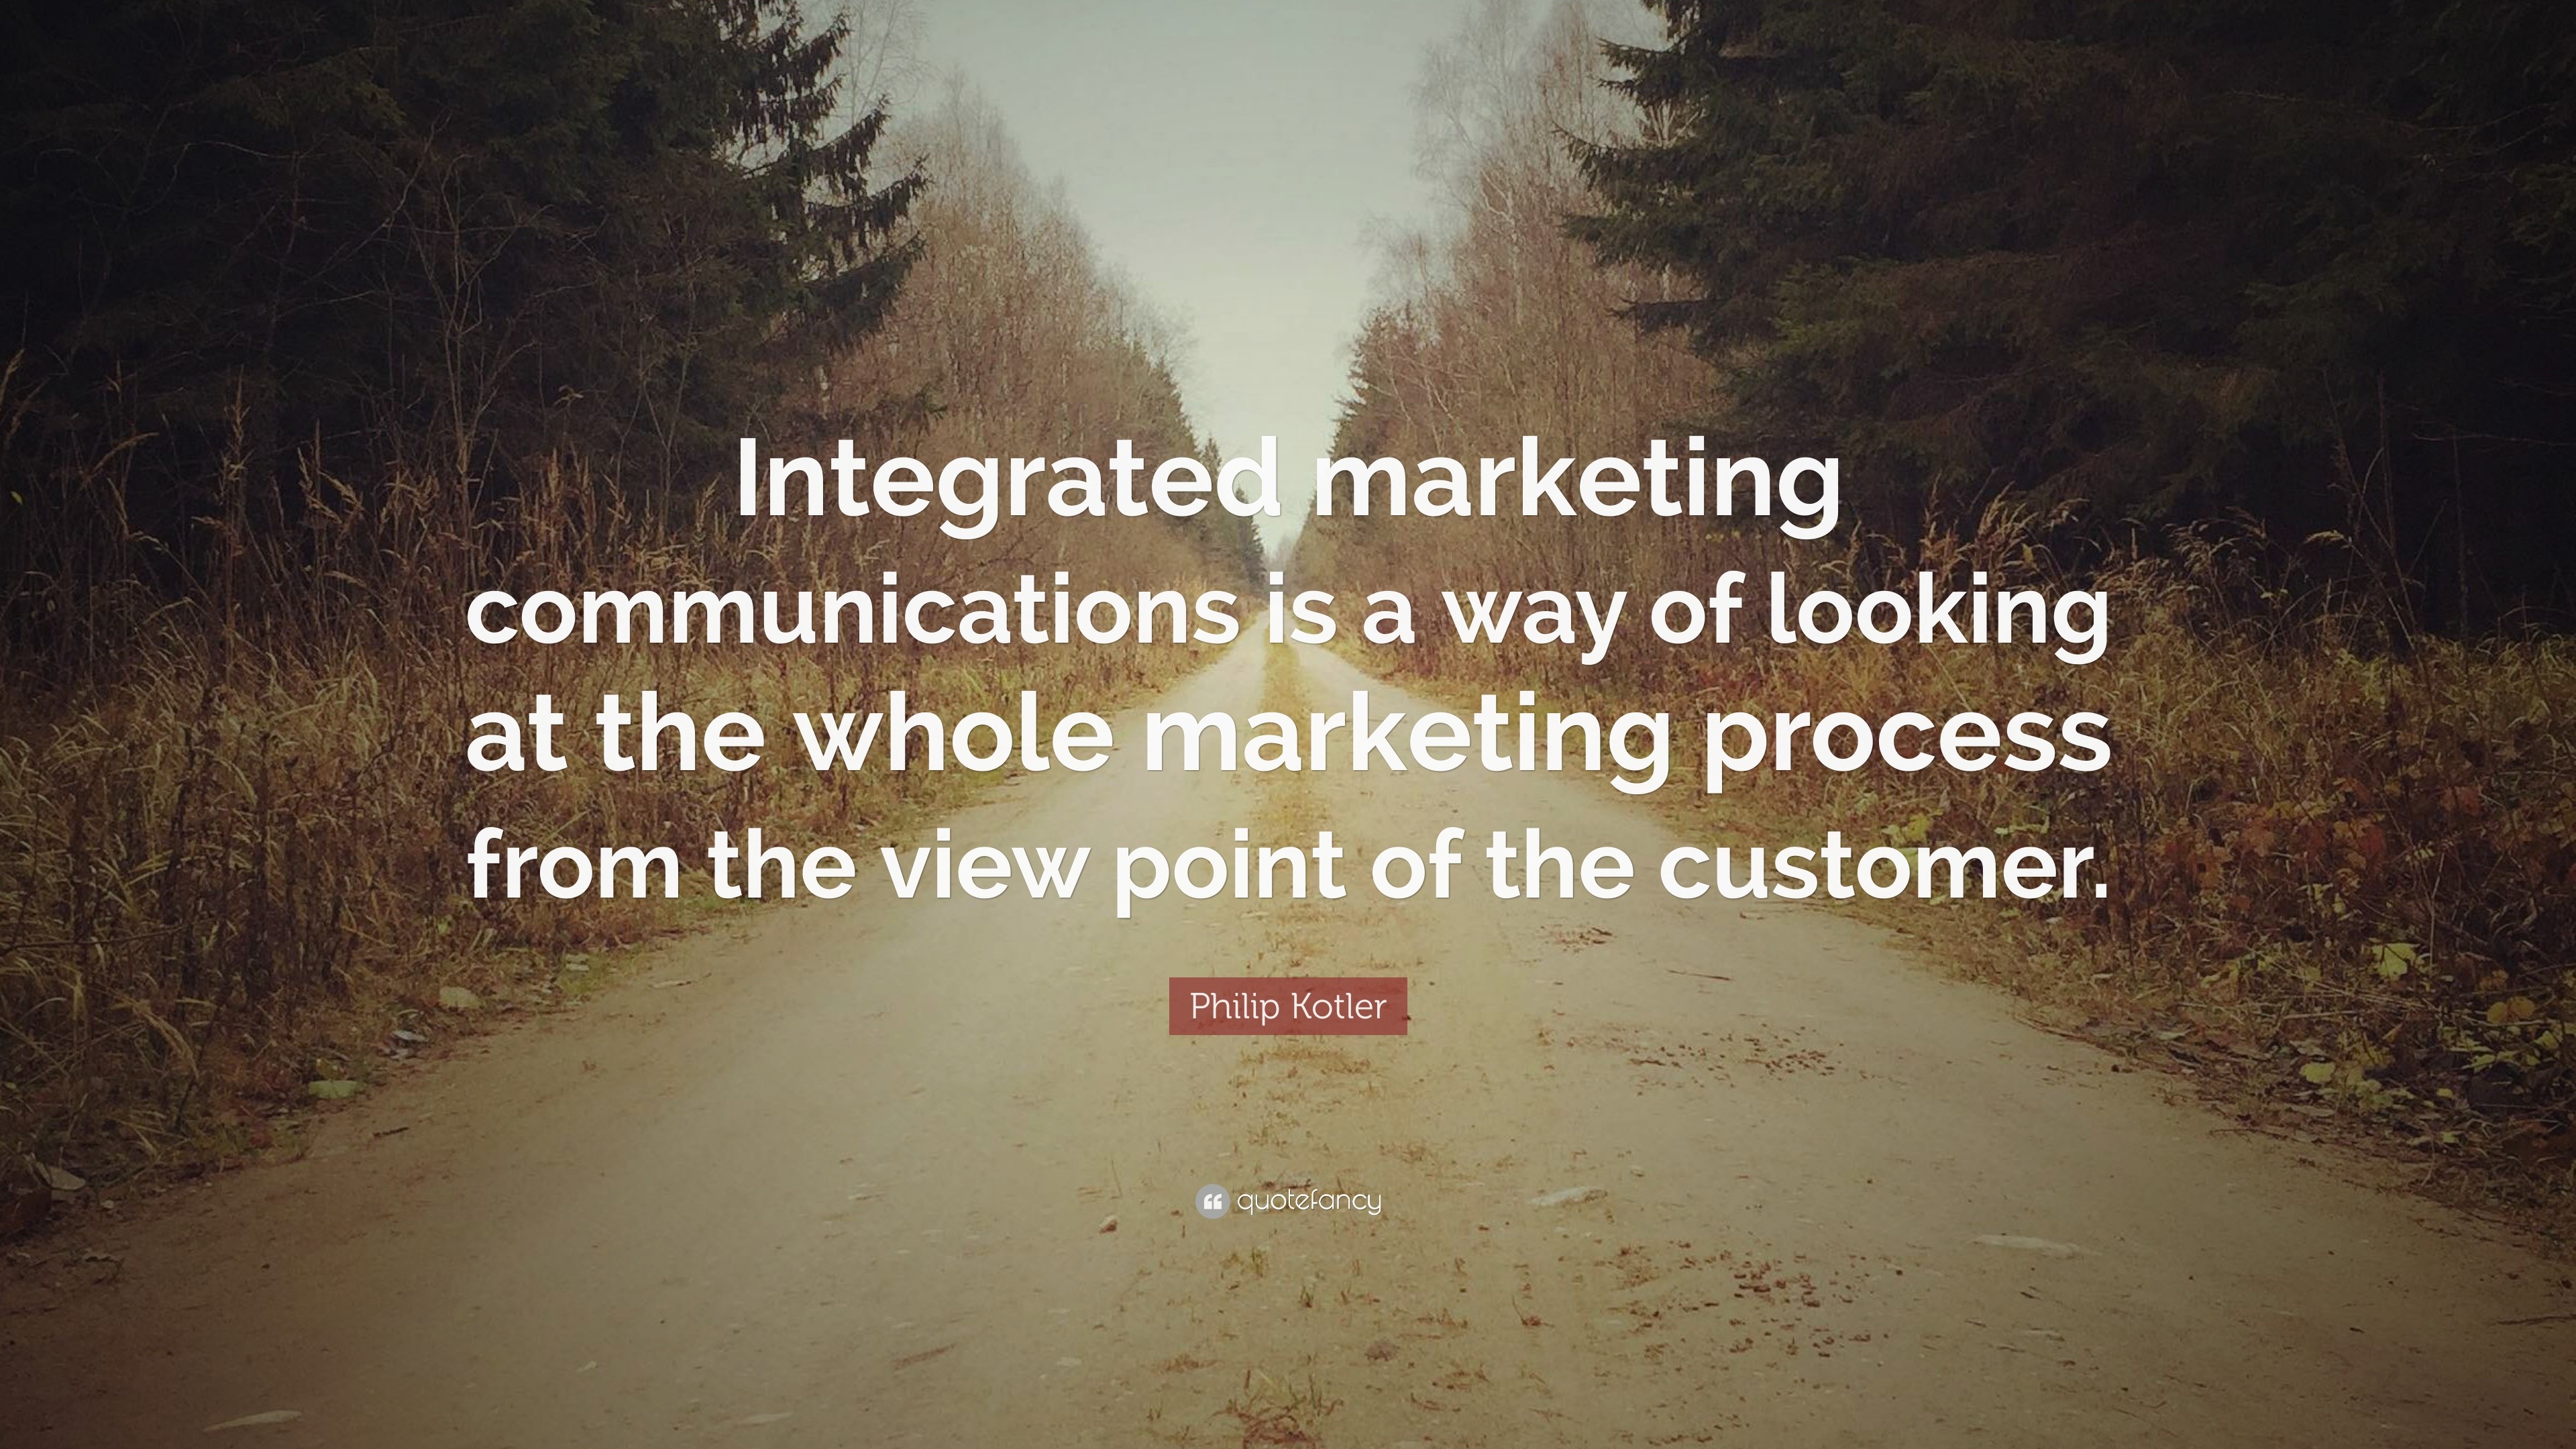 Philip Kotler Quote “Integrated marketing communications